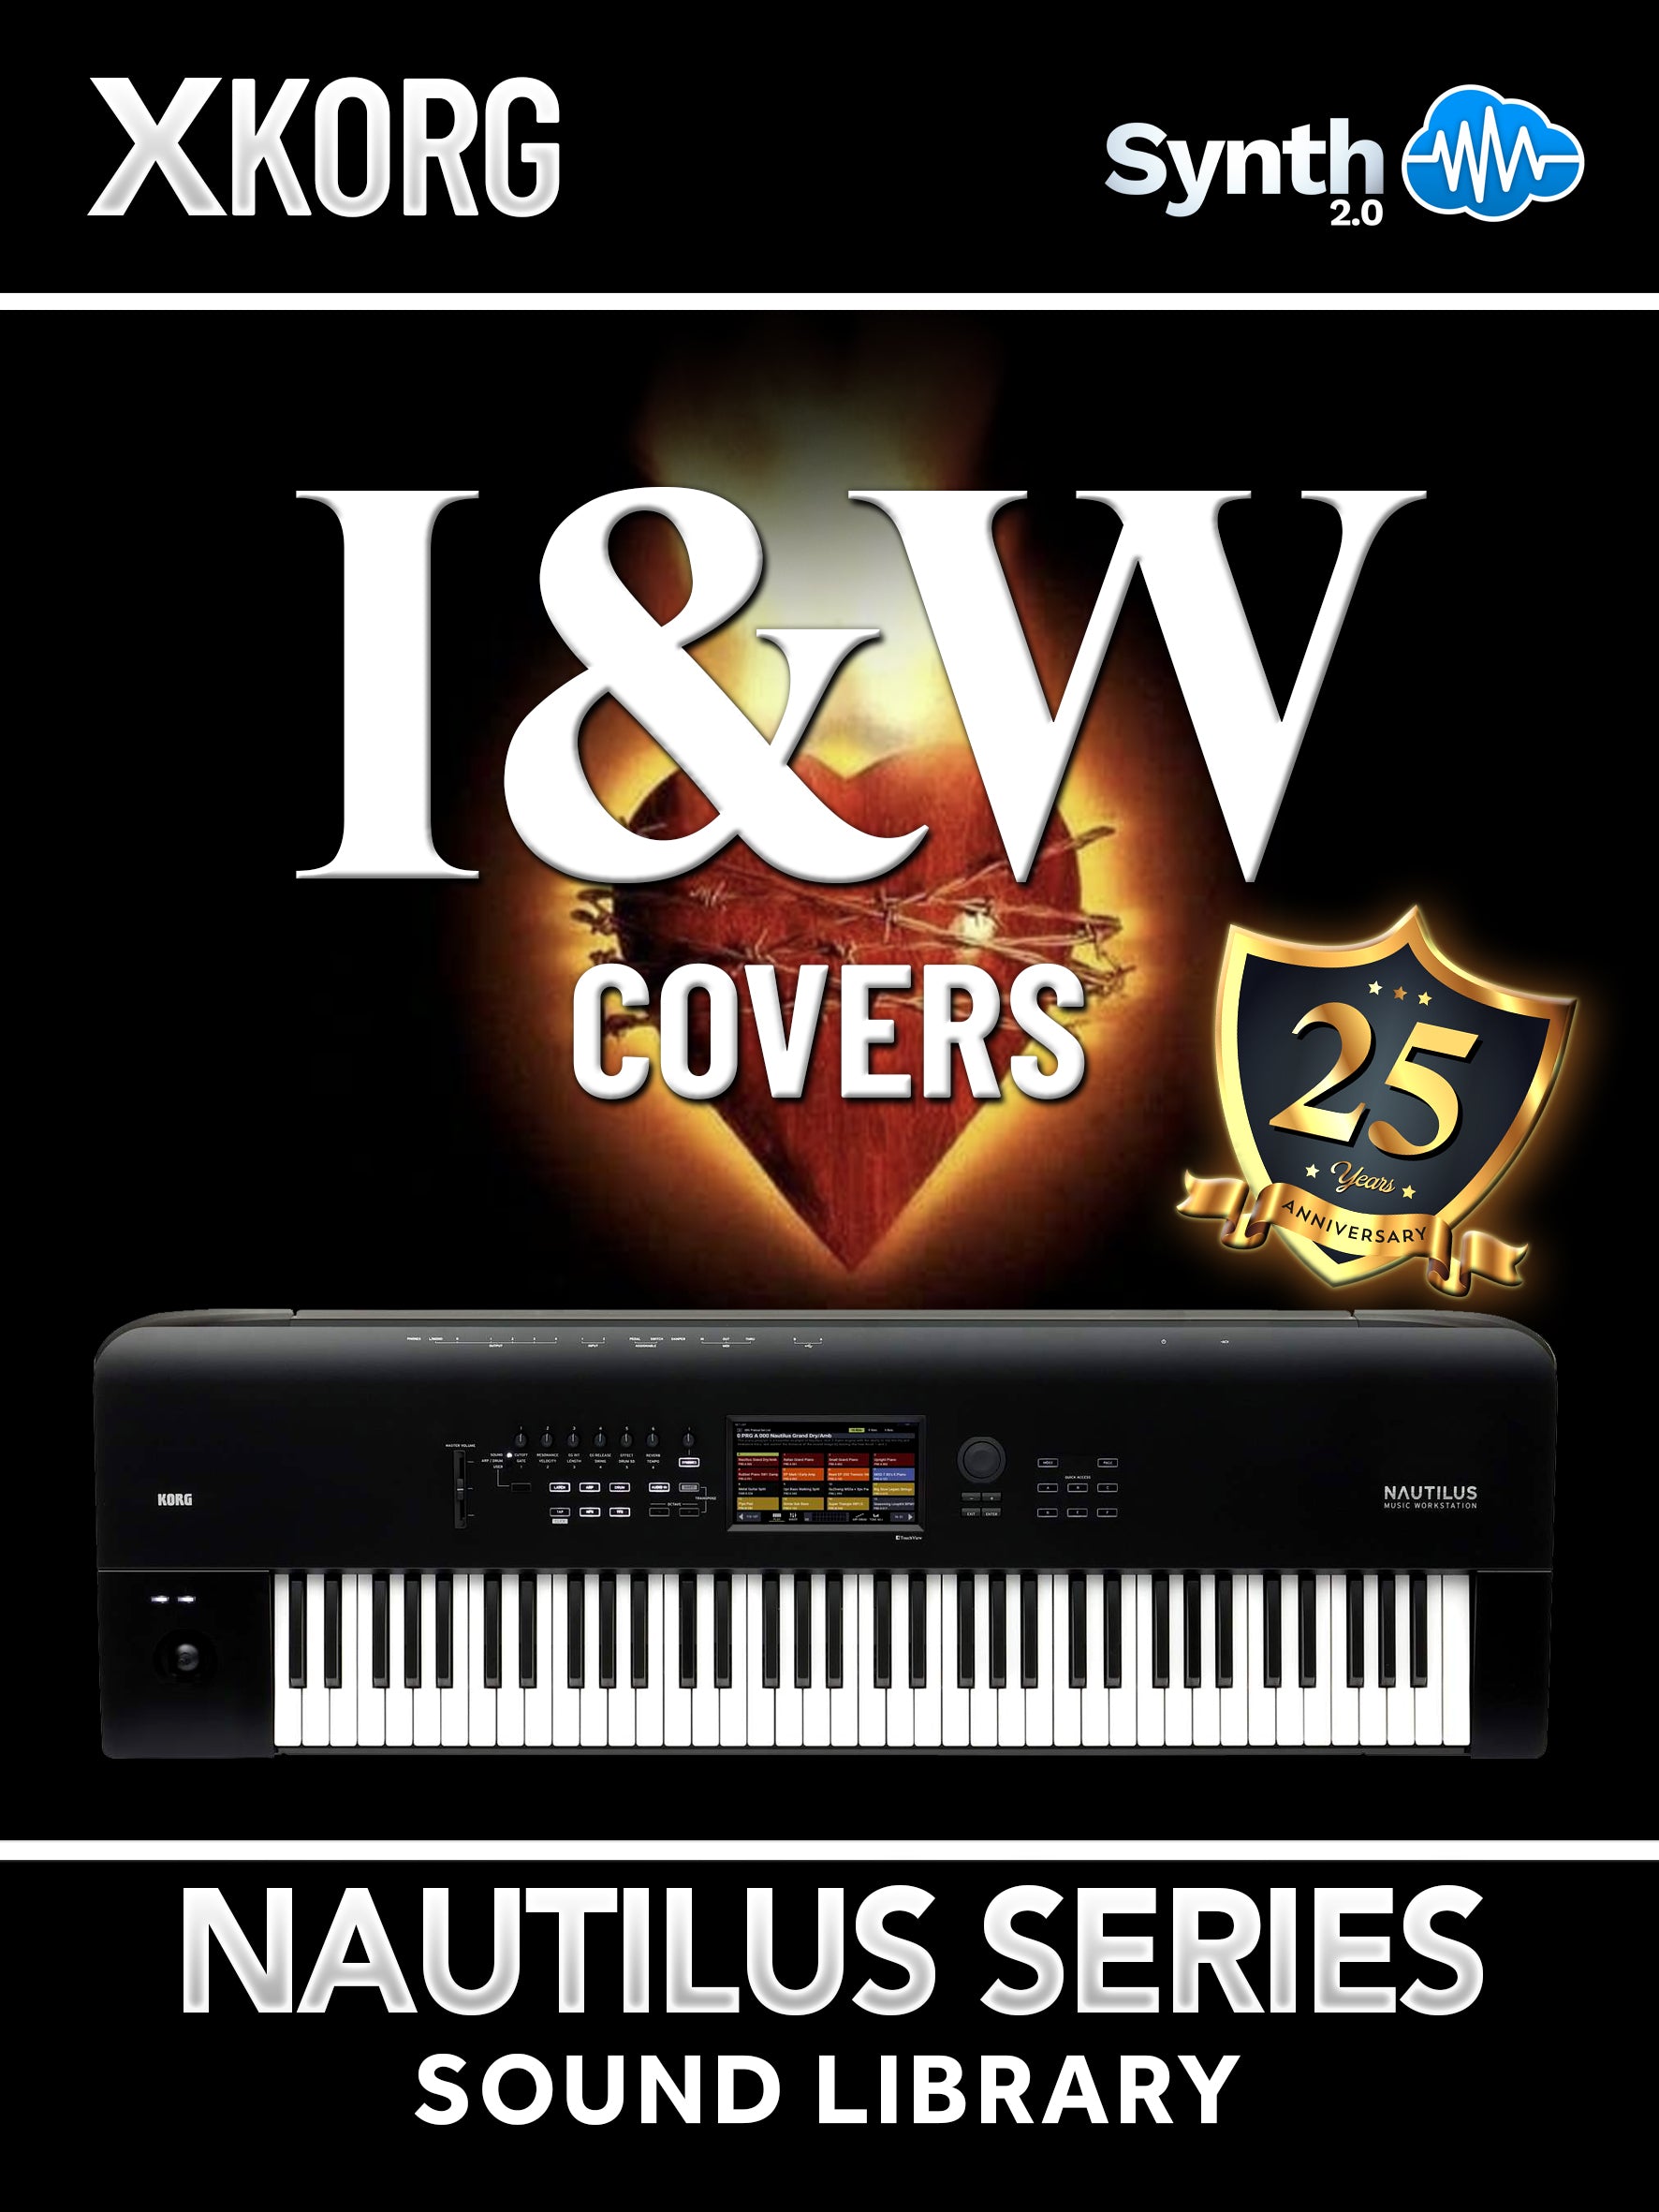 SSX139 - ( Bundle ) - I&W Covers / 25th Anniversary + Super JD8 Reloaded - Korg Nautilus Series